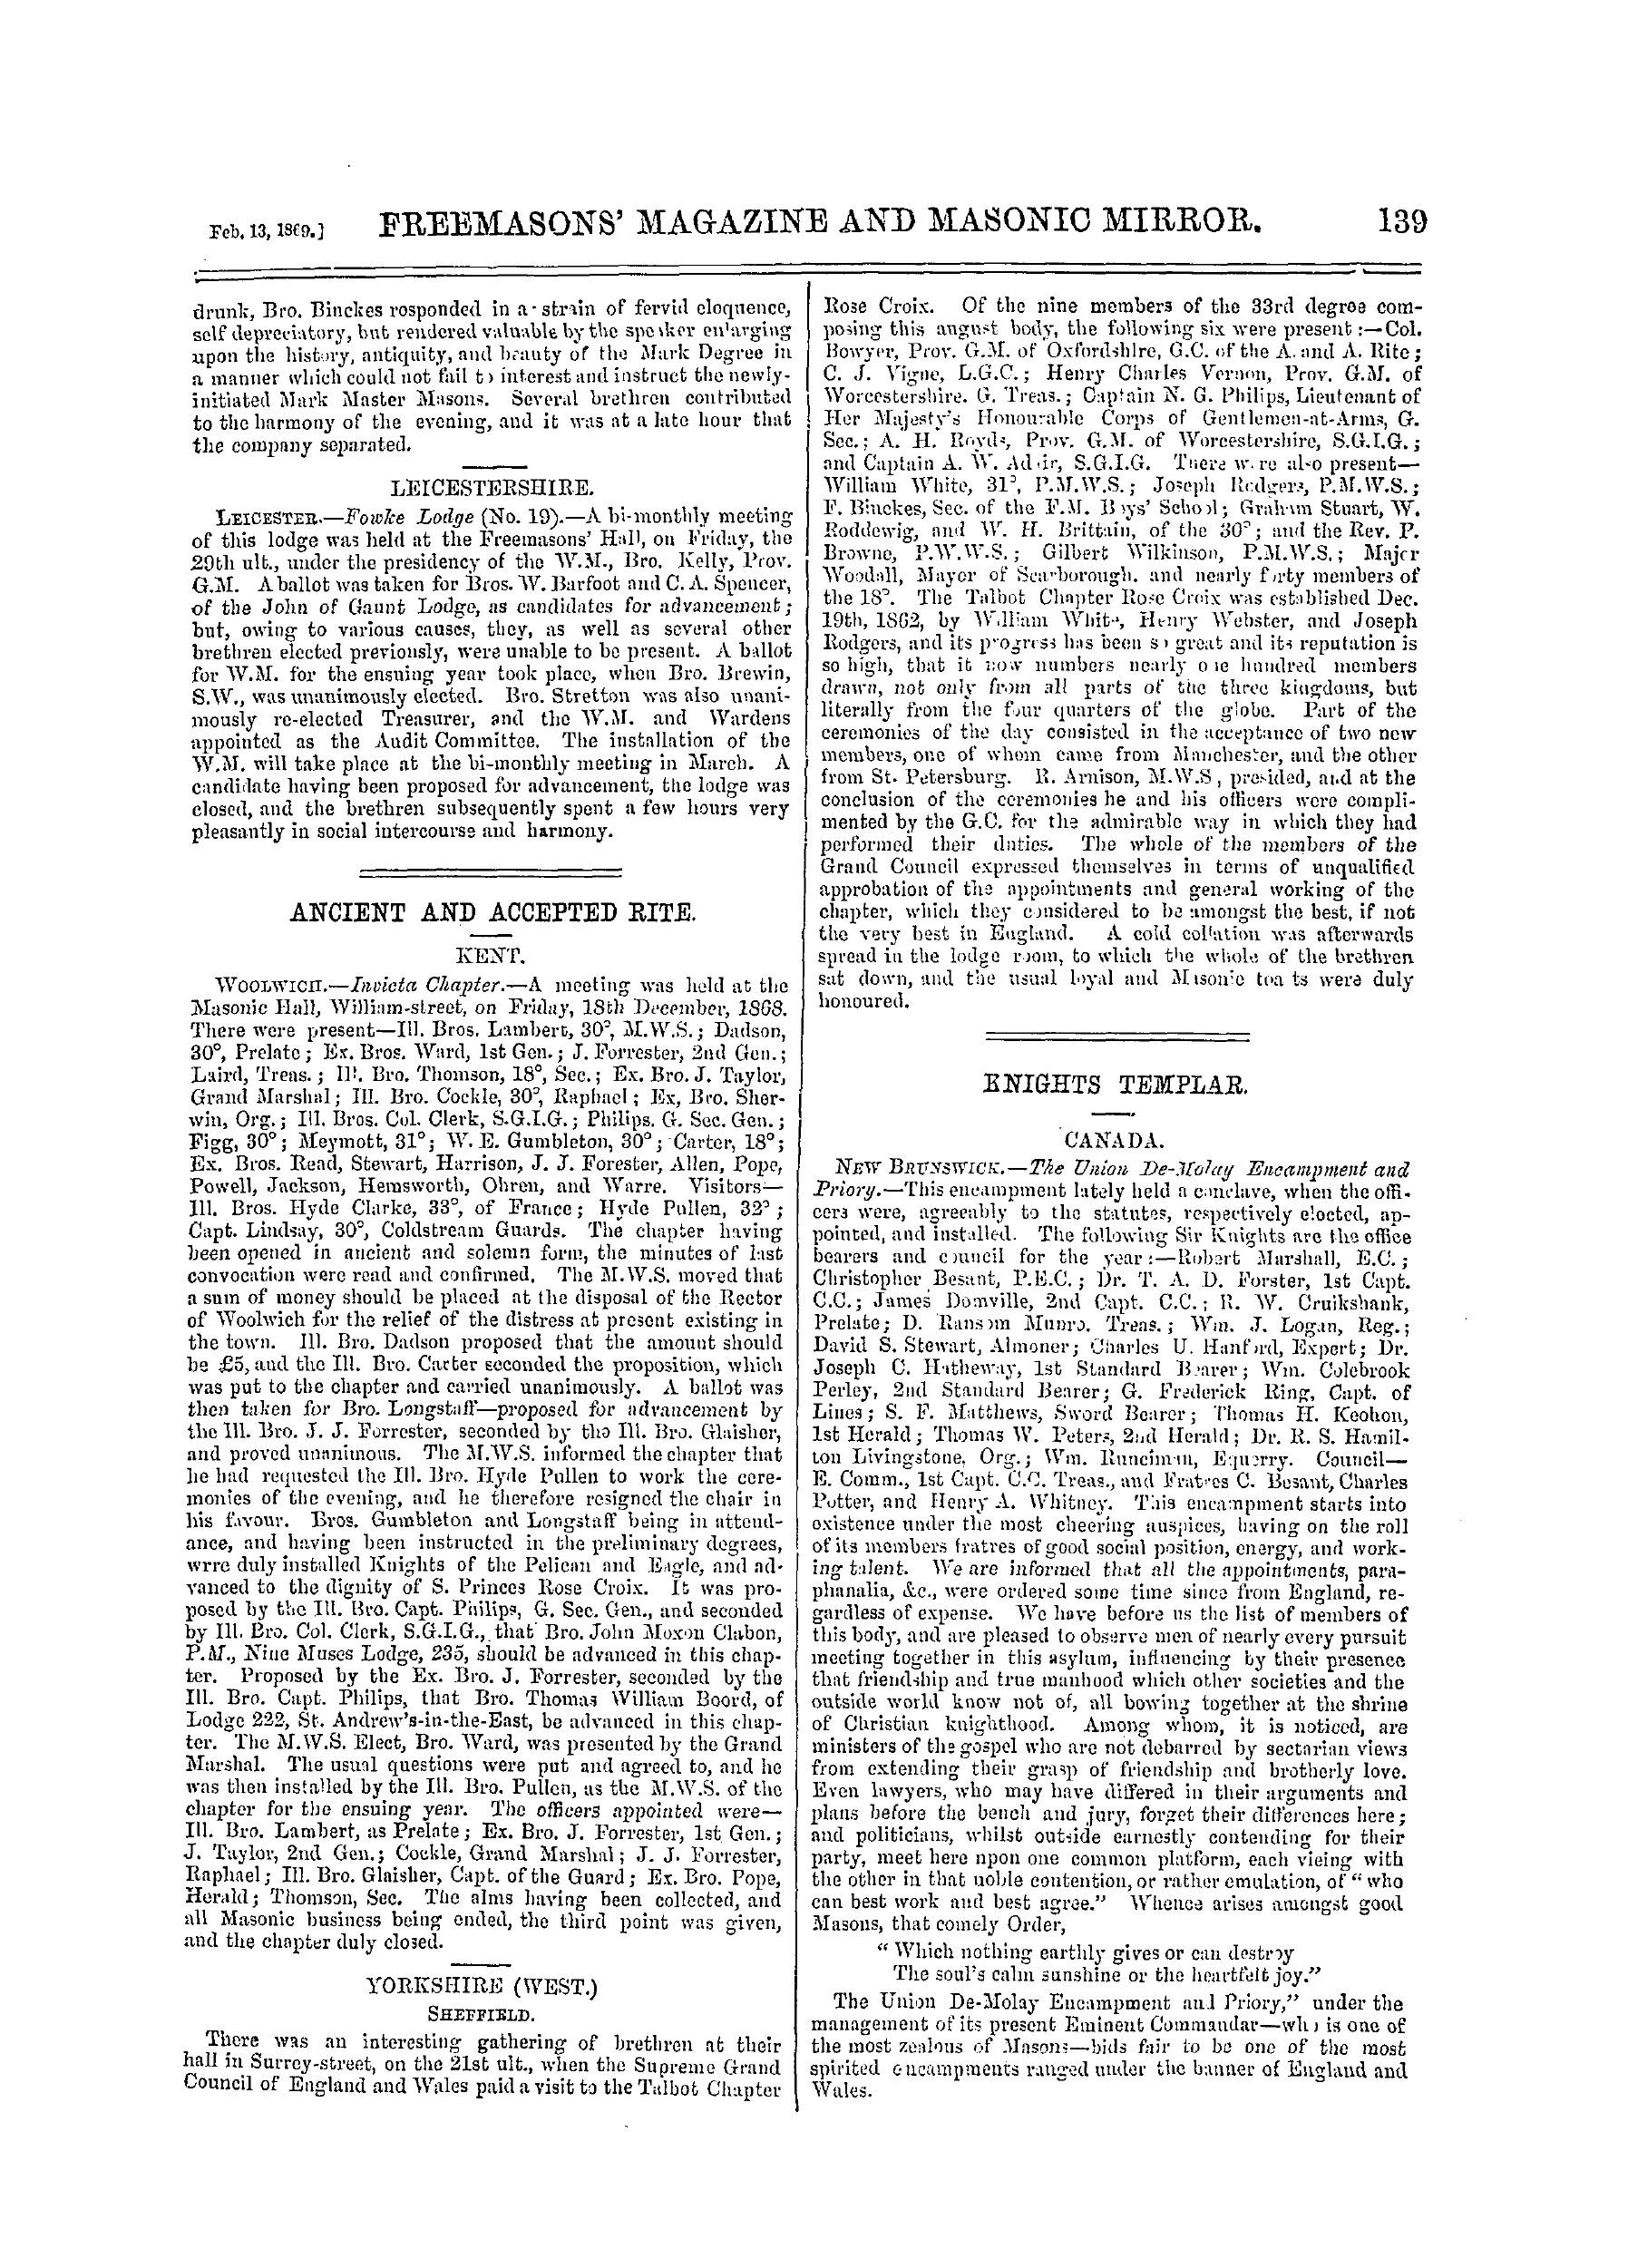 The Freemasons' Monthly Magazine: 1869-02-13 - Ancient And Accepted Rite.